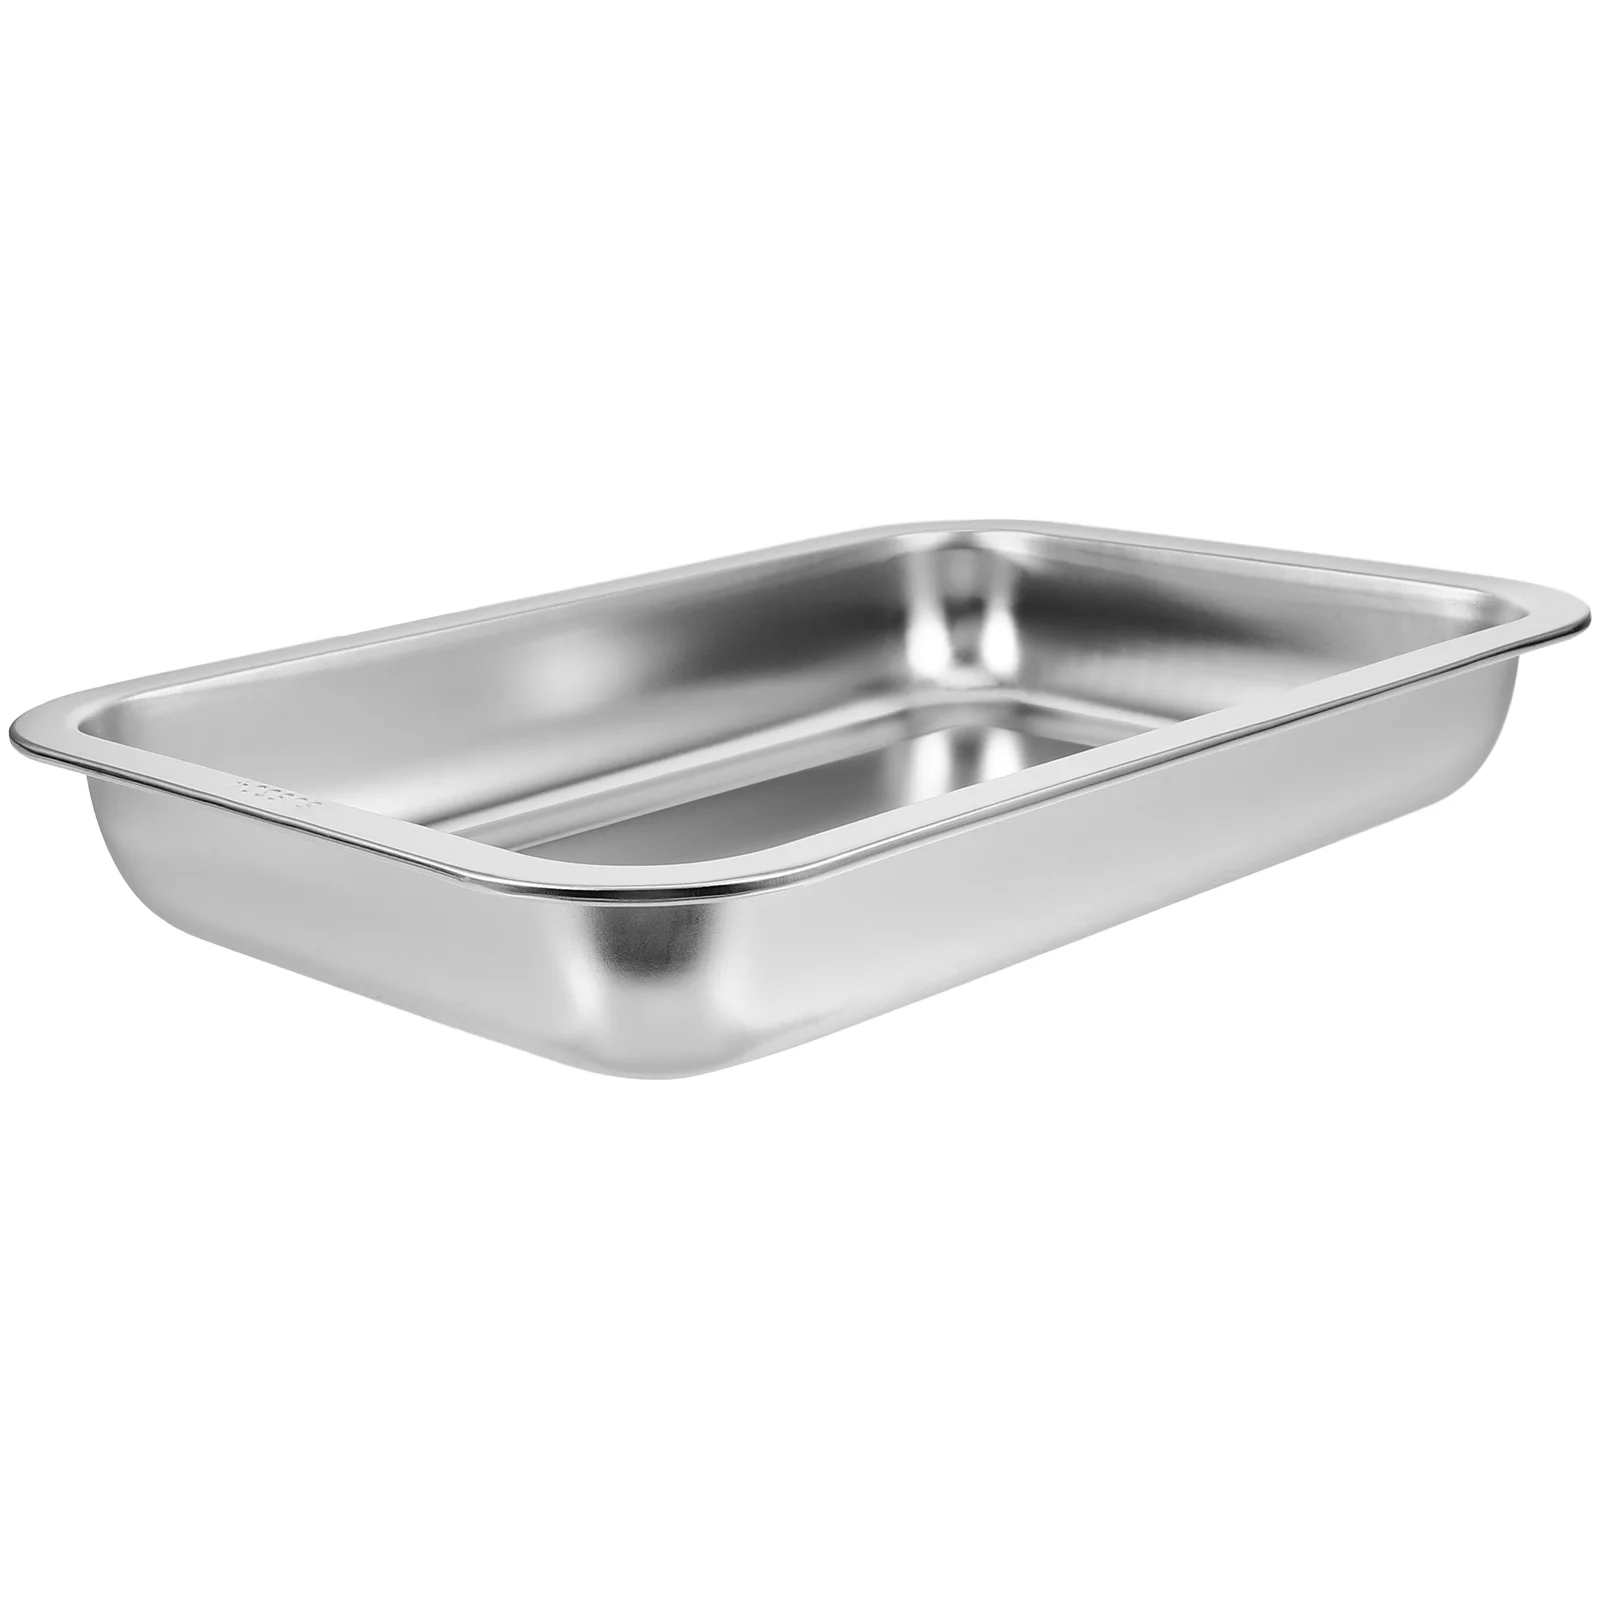 

Stainless Steel Cat Litter Box Rabbit Tray Shallow Trash Can Bedpan Boxes Kitten Toilet Household